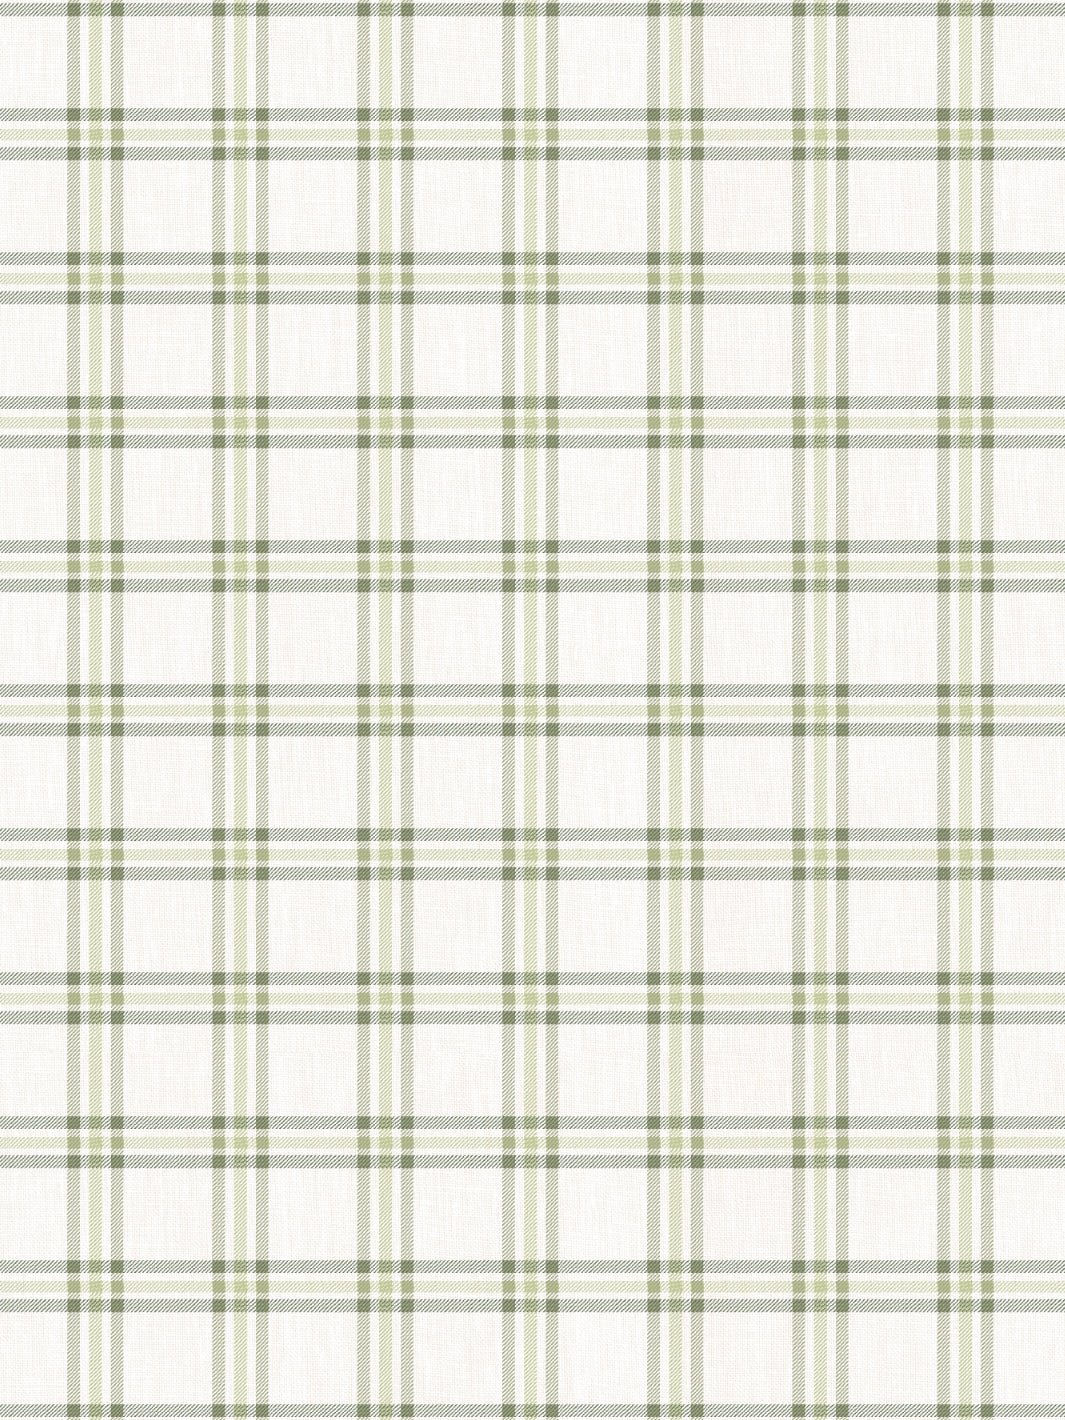 'Rogers Plaid' Linen Fabric by Nathan Turner - Green